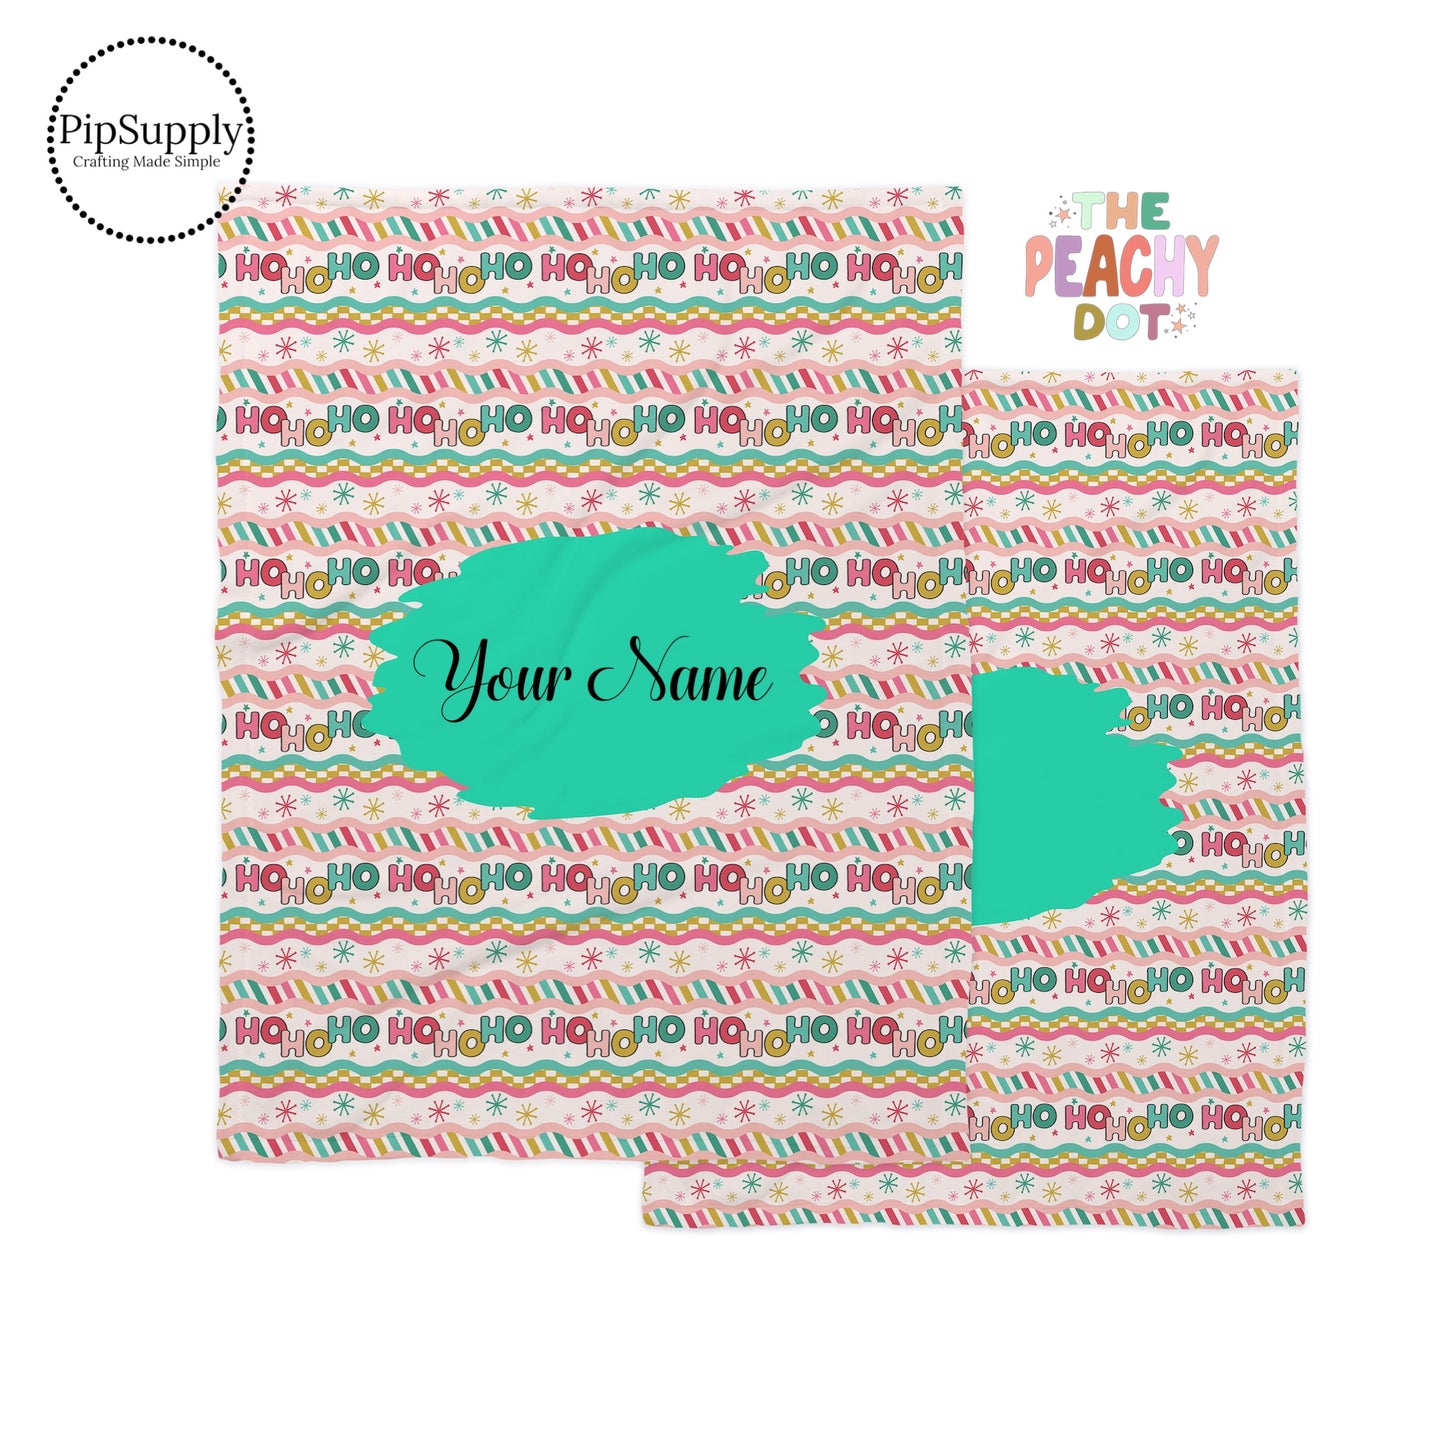 Fleece blanket with bright pastel Christmas pattern designed by The Peachy Dot with customizable name center.